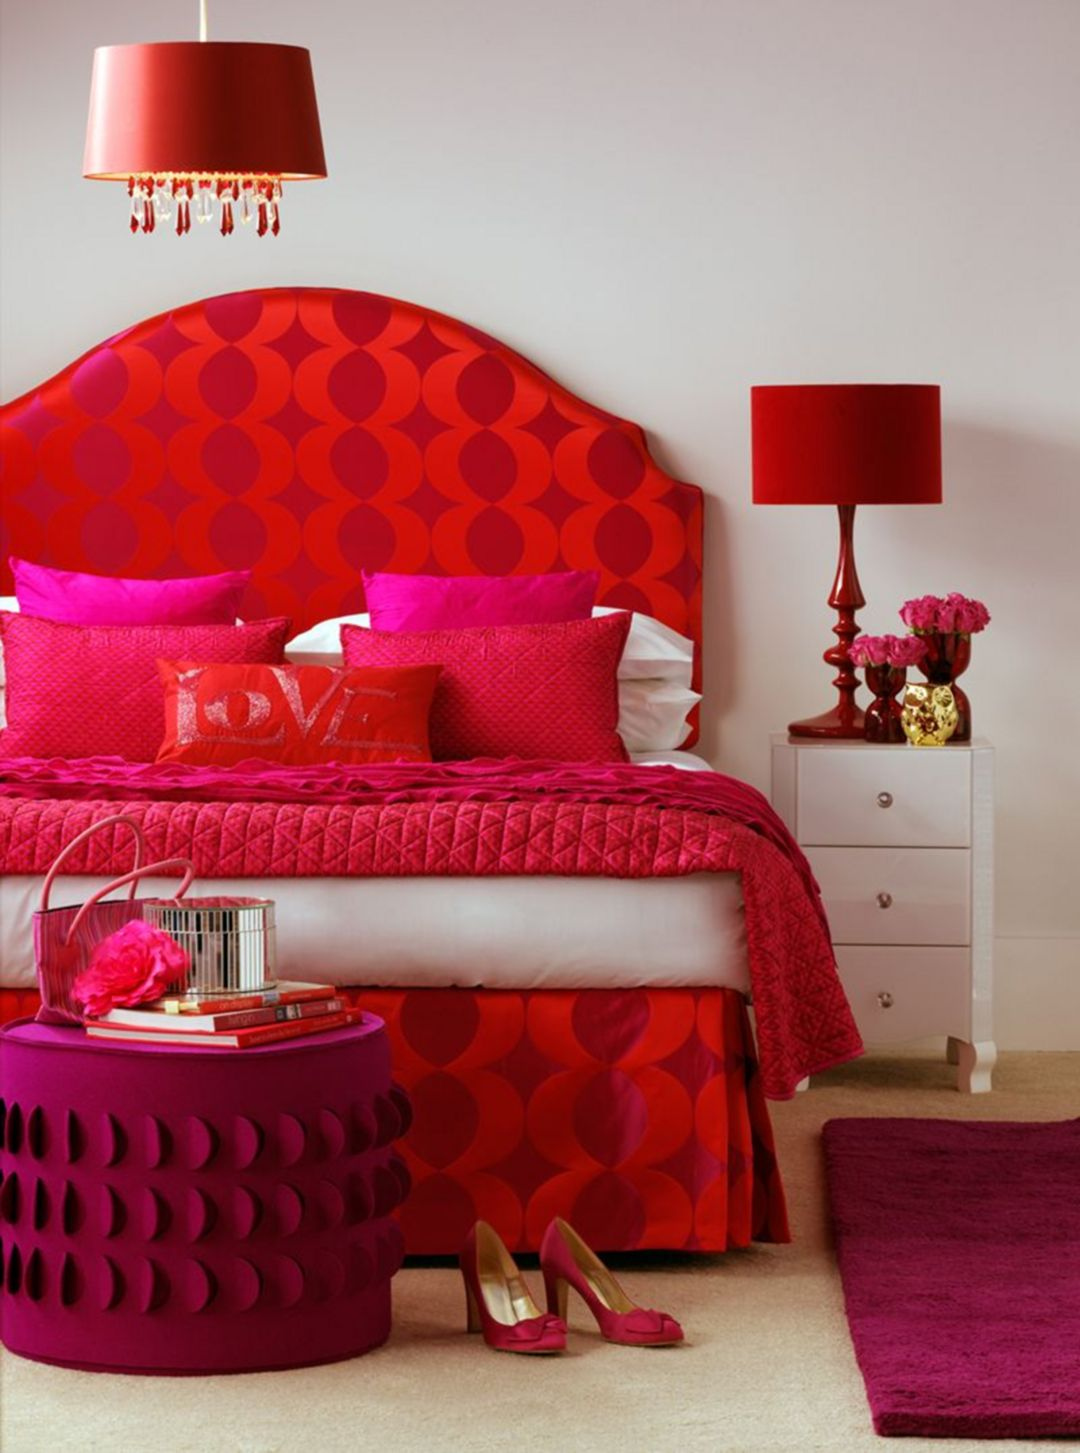 Red Colour | Red Bed | Red Room | Red Bedsheet